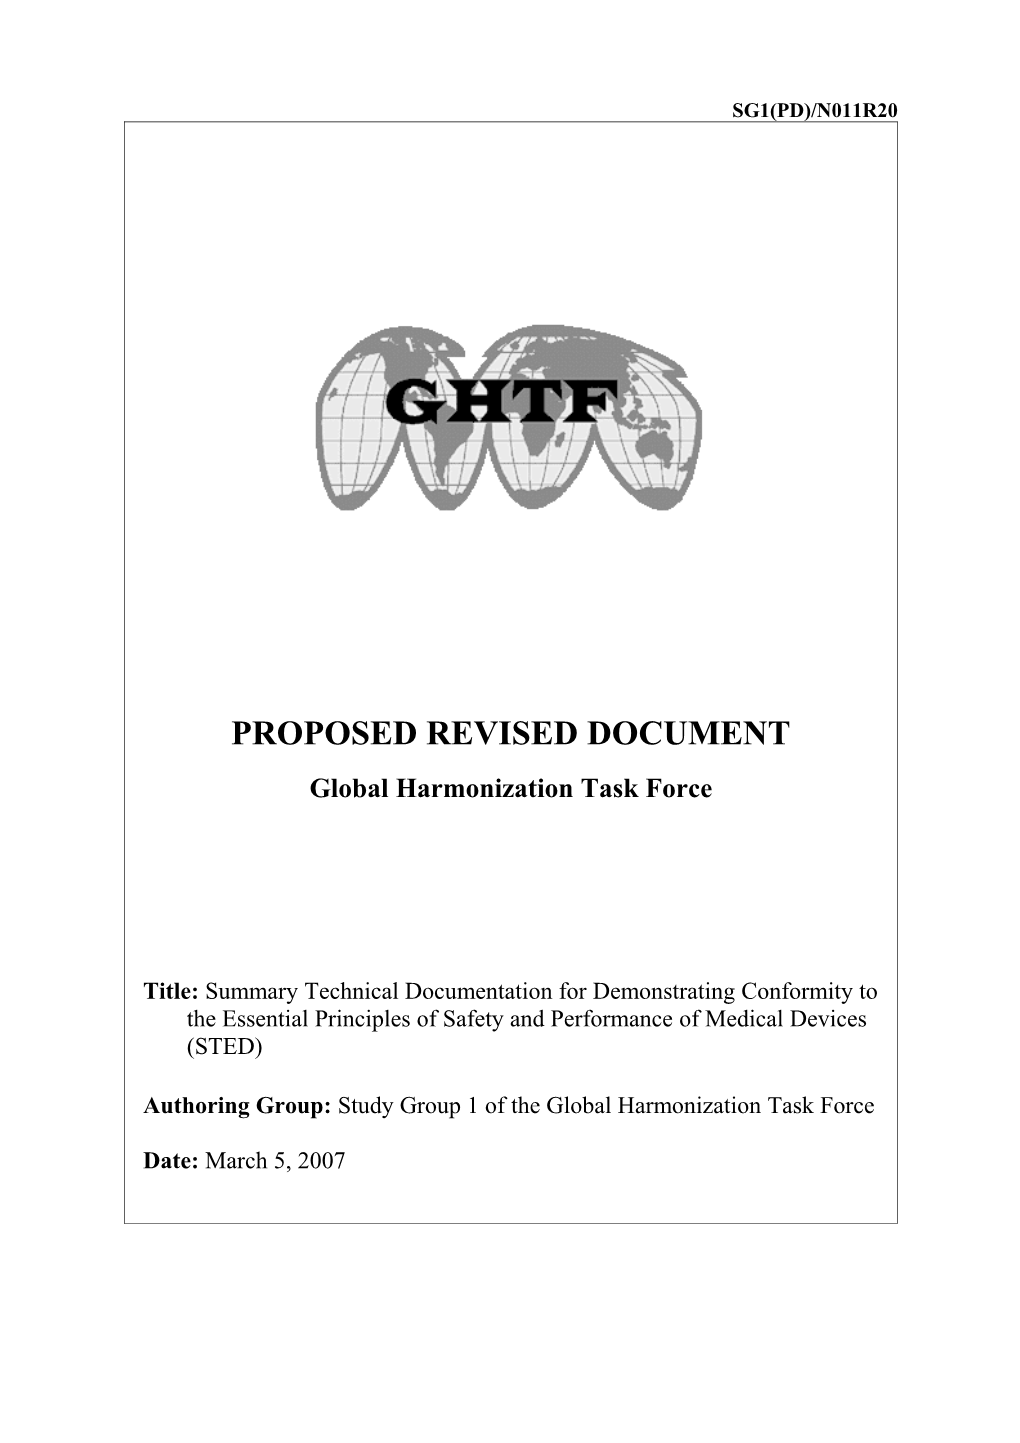 GHTF SG1 Essential Principles of Safety and Performance of Medical Devices (STED)